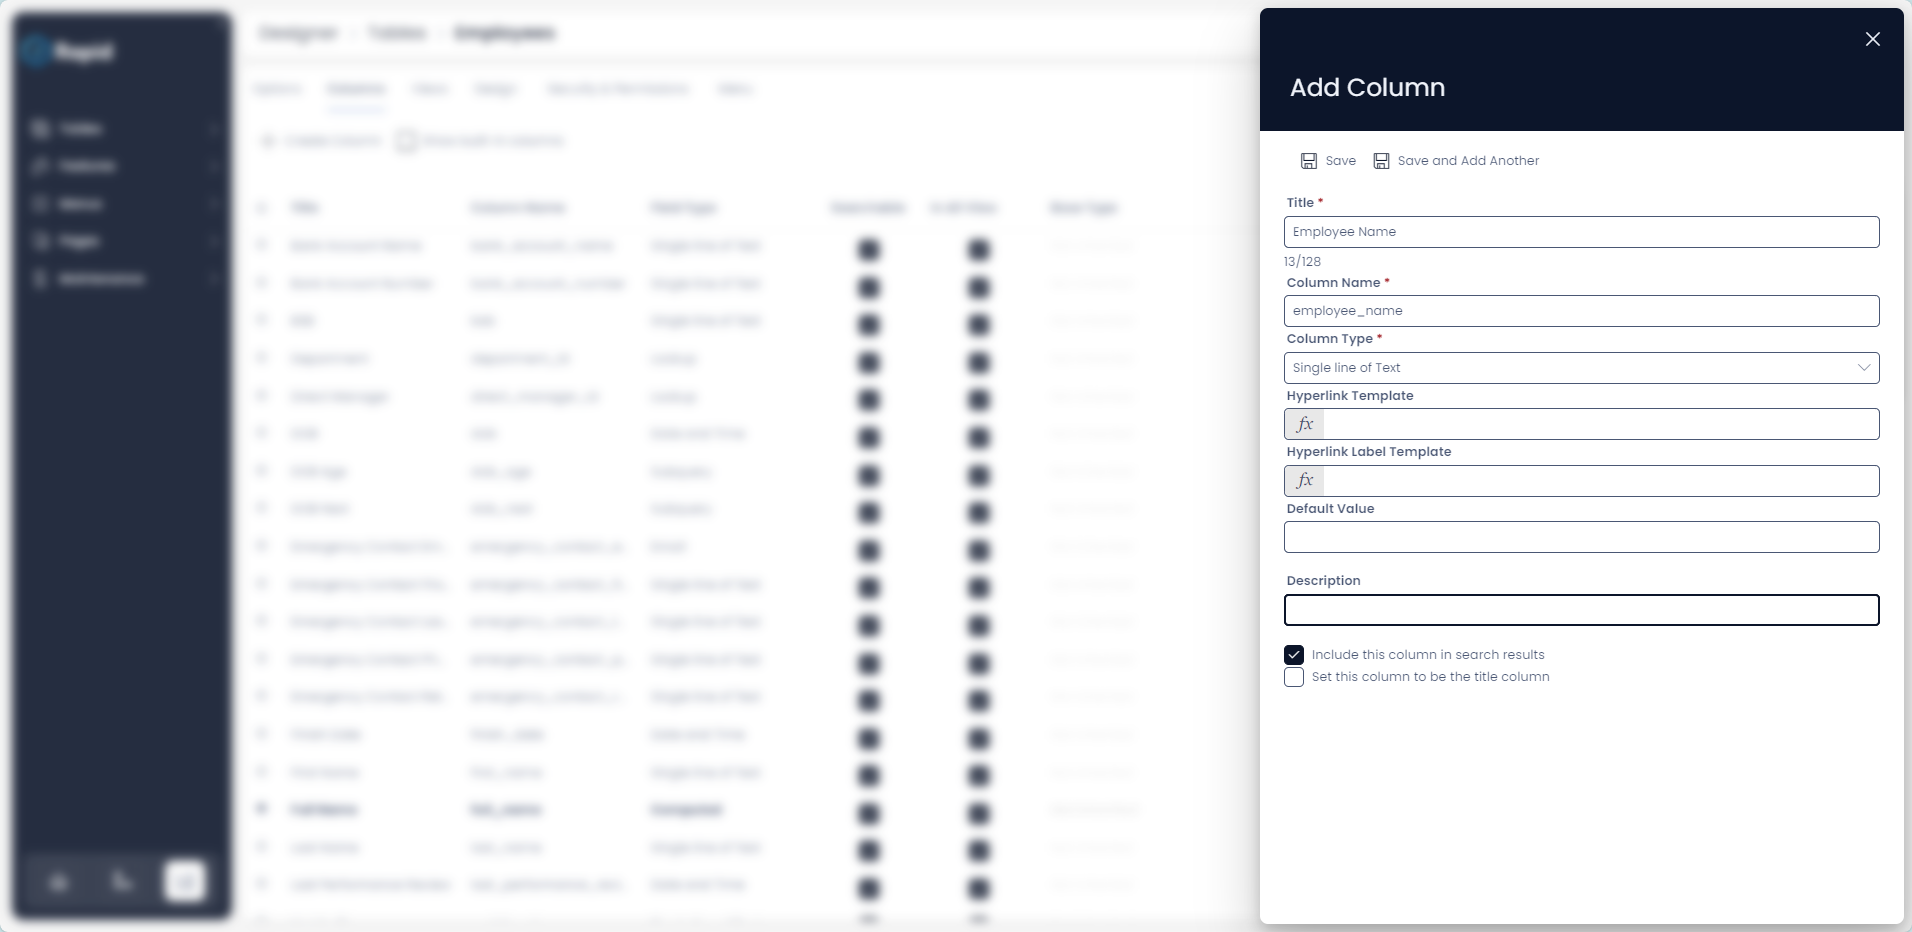 A screenshot to demonstrate the functionality of Designer. The screenshot is mostly blurred. On the right hand-side of the image is a side panel with the title &quot;Add Column&quot;, followed by a series of fields where the user can title their database column, choose the type of data, add hyperlinks, etc. The purpose of the image is to simply demonstrate that users can build their database using a visual interface rather than coding SQL by hand.